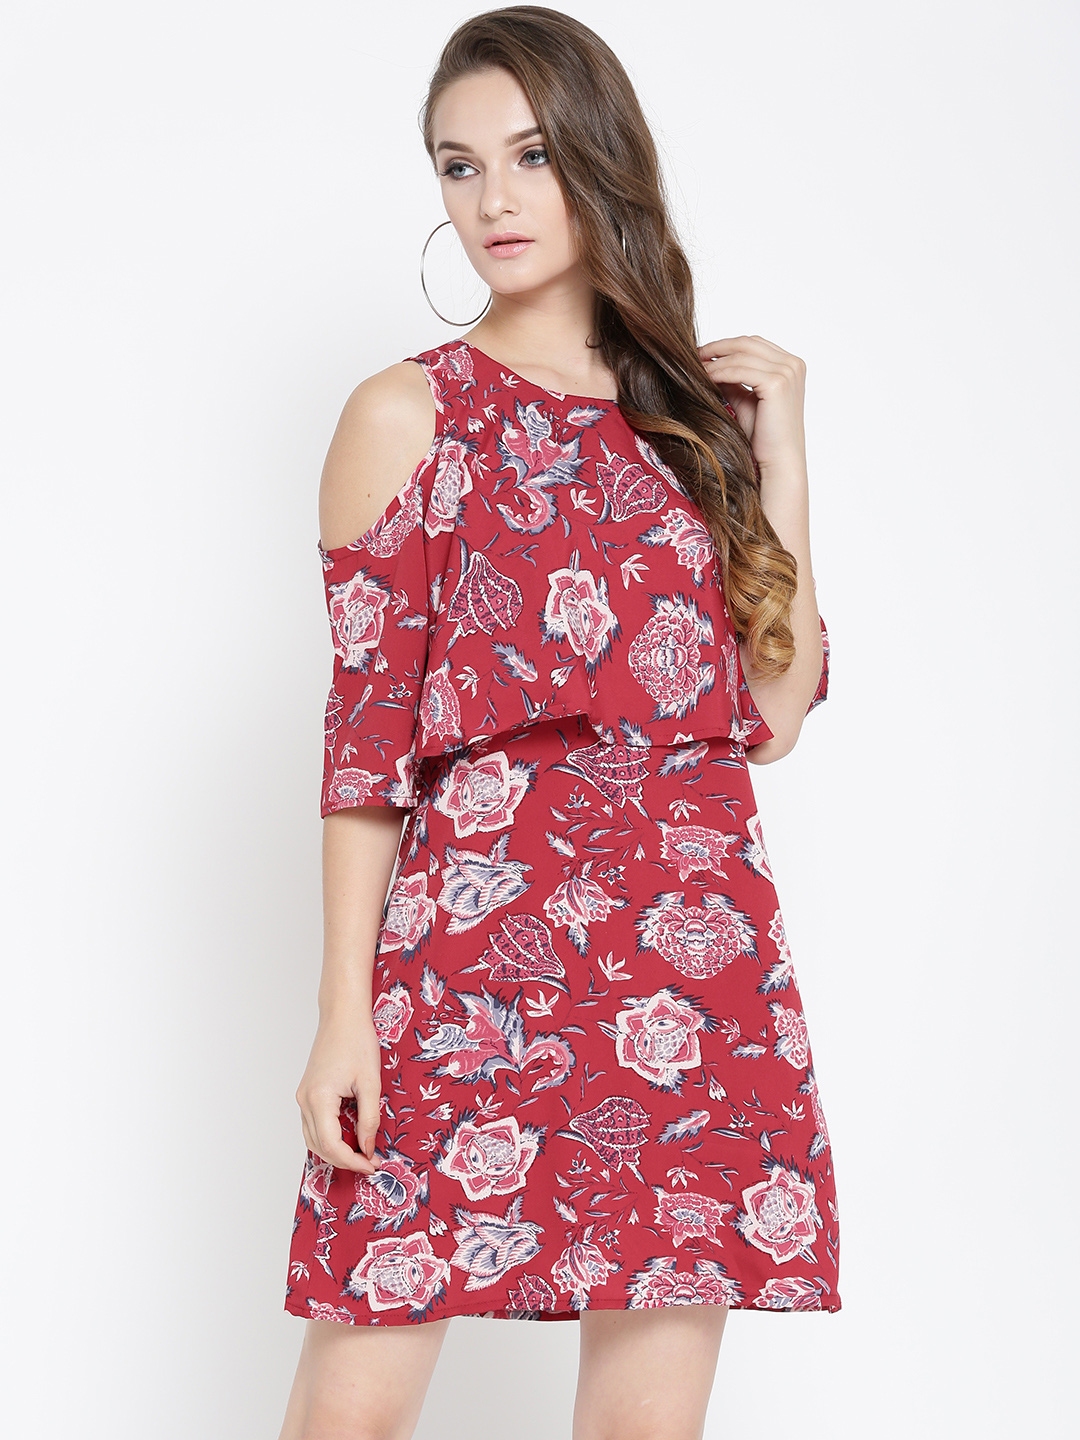 Printed & Floral Dresses for women by Myntra